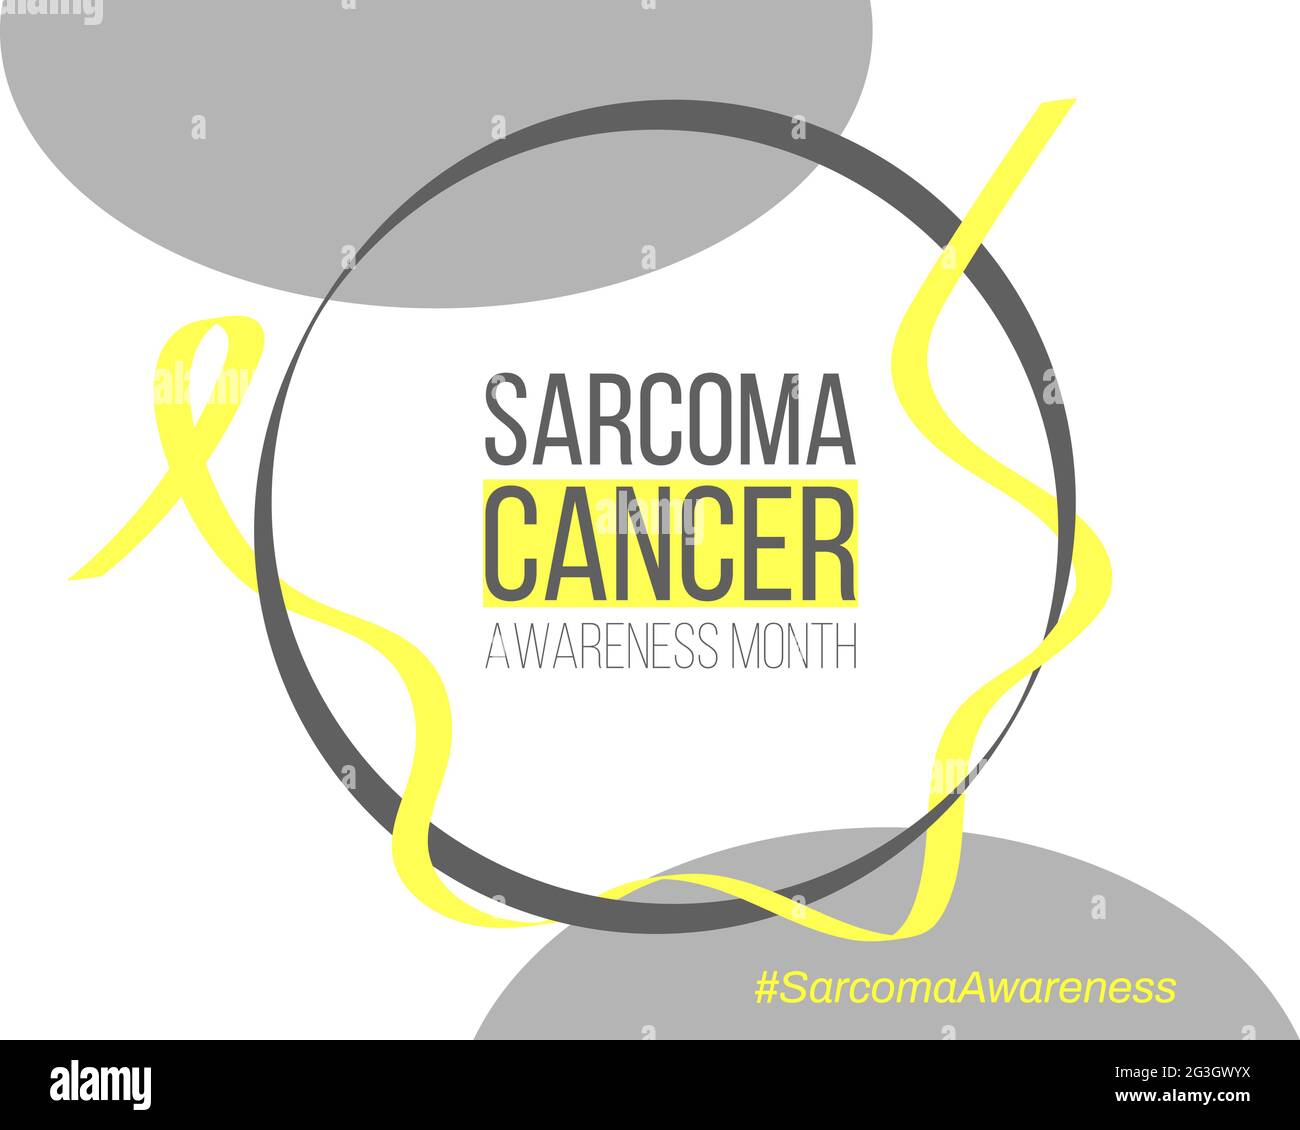 Sarcoma cancer awareness month concept. Banner template with yellow ribbon and text. Vector illustration. Stock Vector